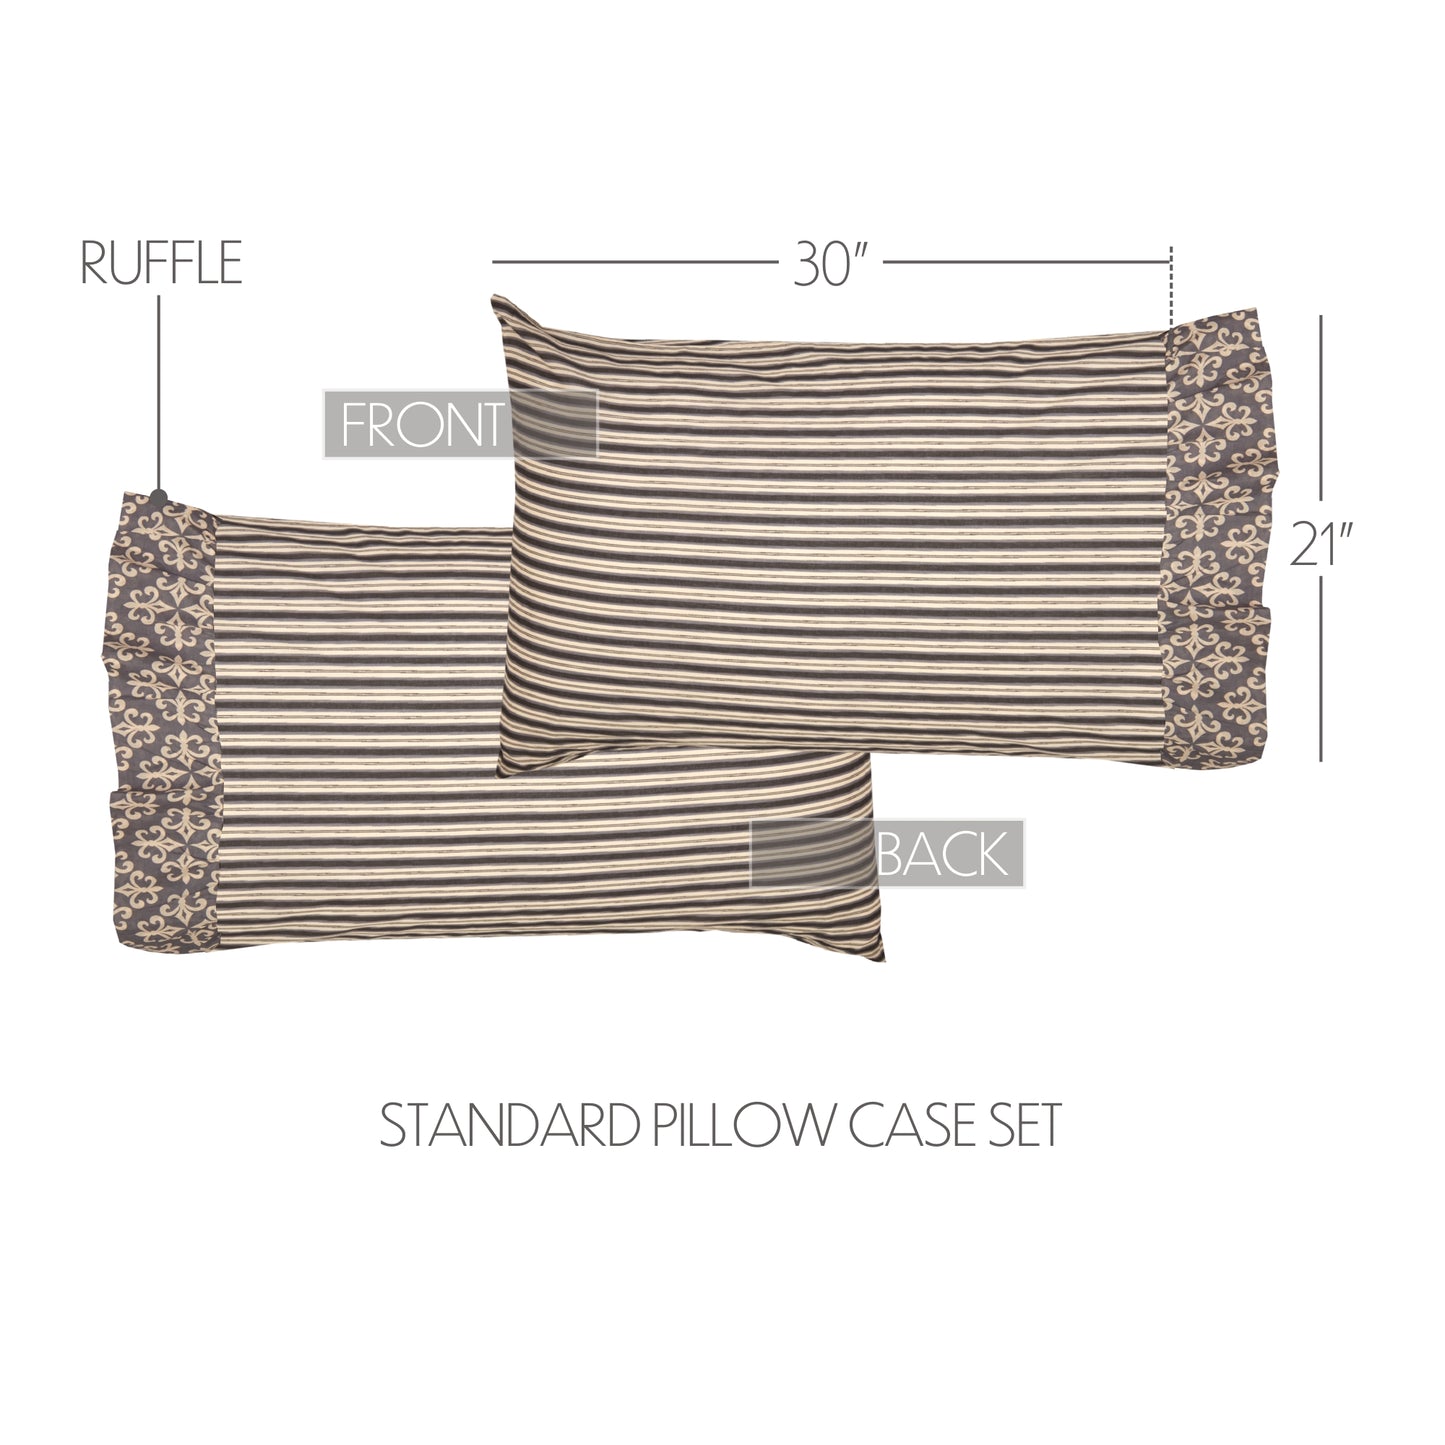 18014-Elysee-Standard-Pillow-Case-Set-of-2---21x30-image